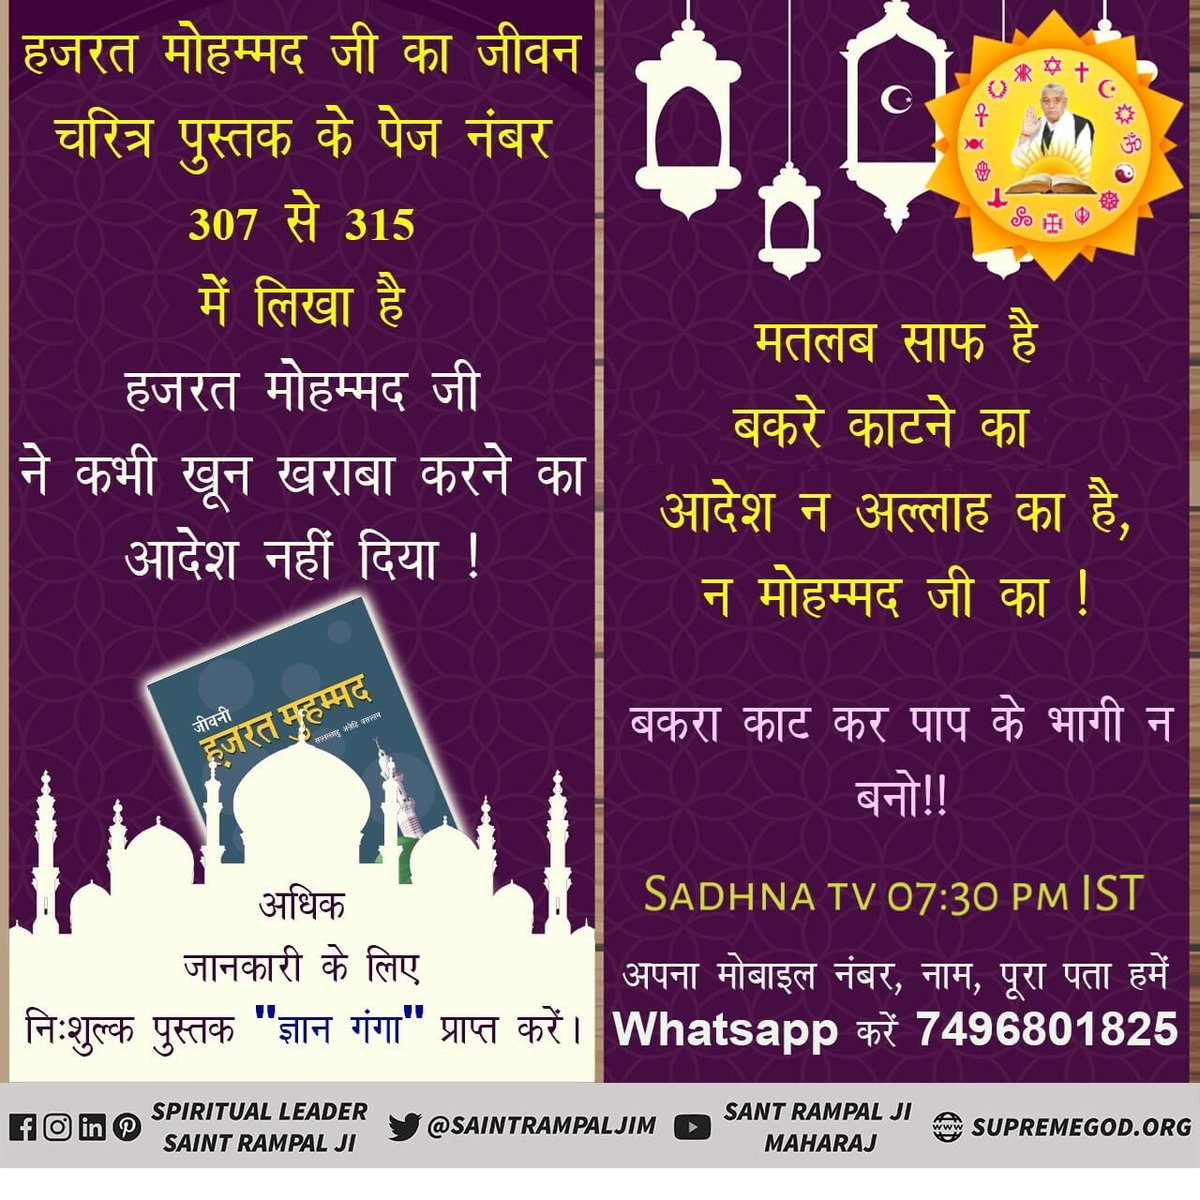 #Allah_Is_Kabir
According to Atharvved kand 4 Anuvaak 1 Mantra 7 #सृष्टिरचयिता_कबीरपरमेश्वर
Supreme god is Kabir he is the 
For more information #MustListen_Satsang by
@SaintRampalJiM  on Nepal 1TV channel at 6:00 Am everyday.